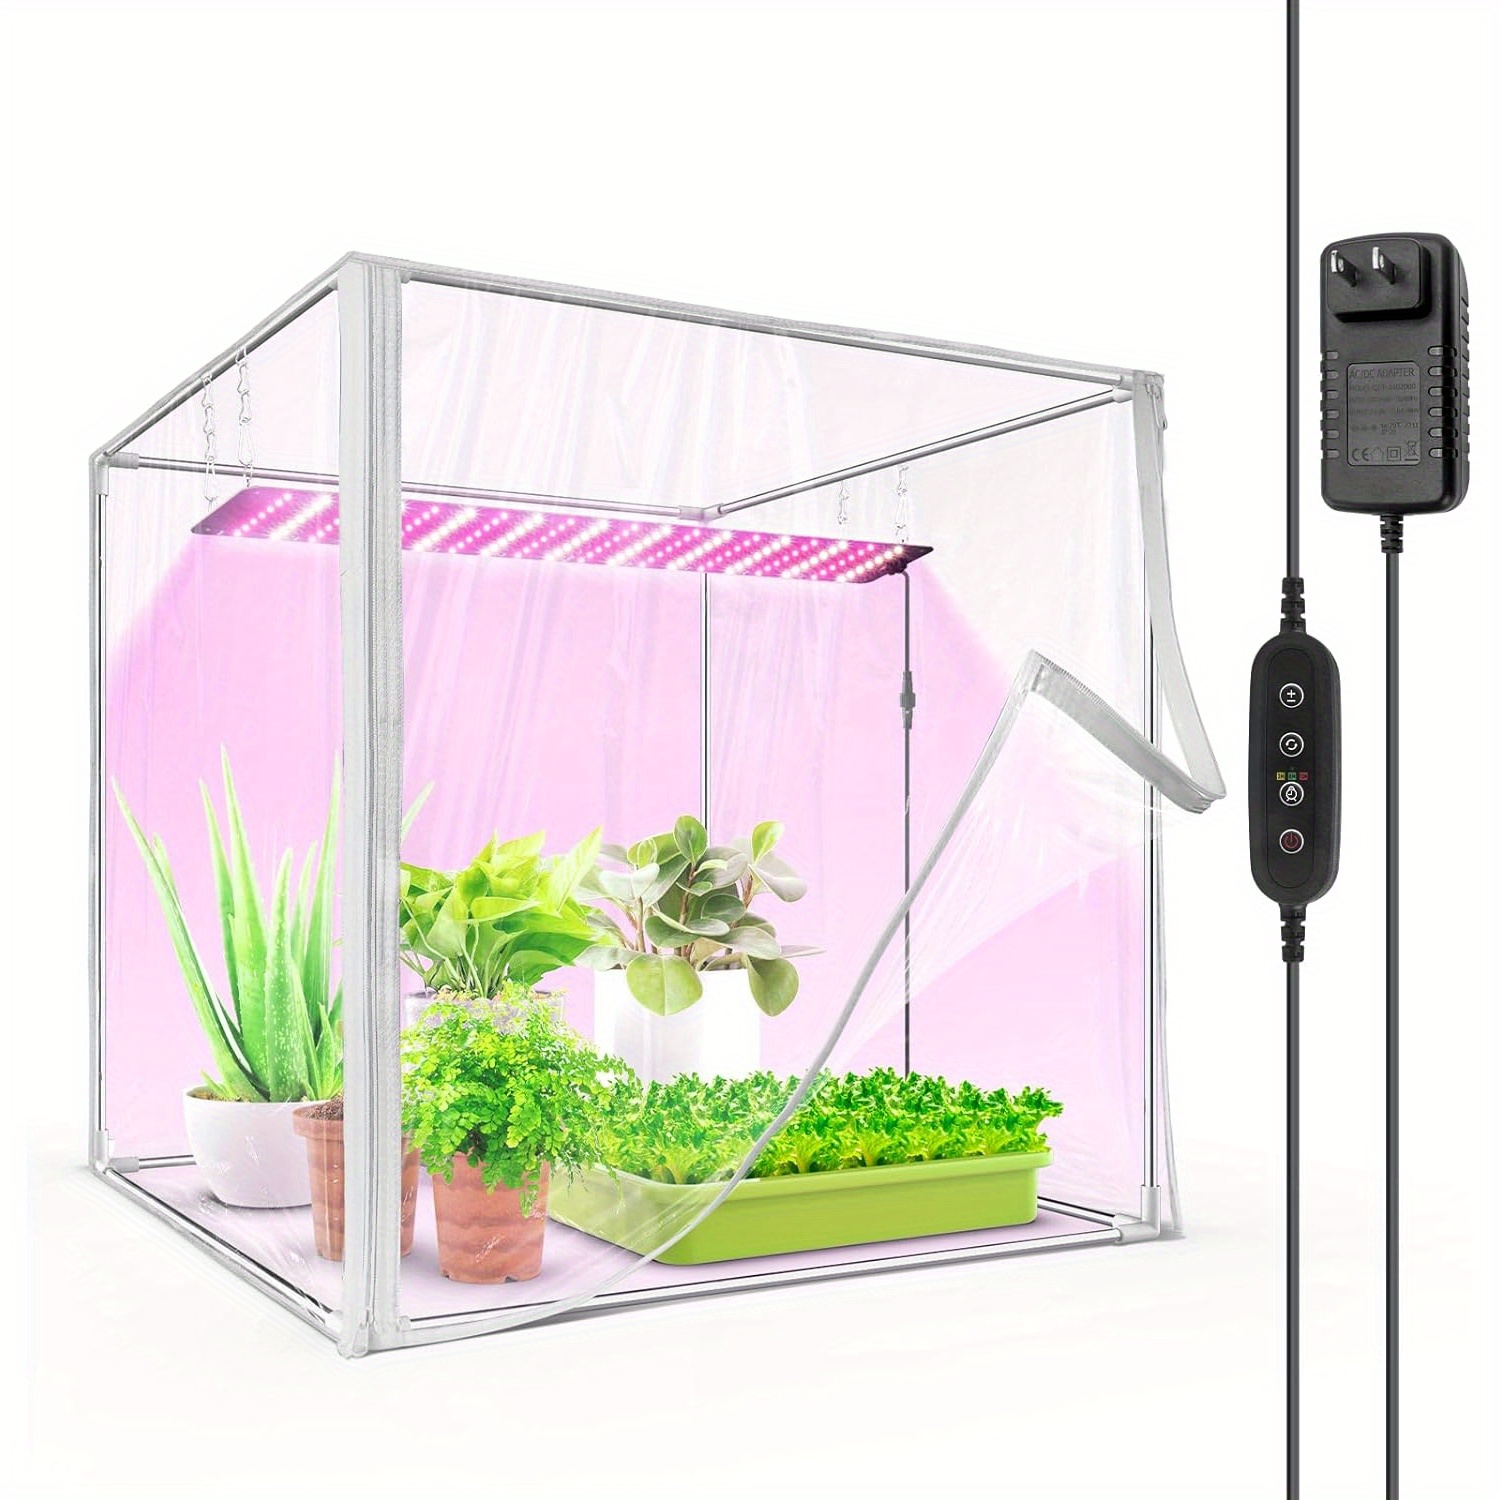 

Indoor Greenhouse With Grow Light, With 40w Seed Starting Led Indoor Plant Light, Portable Mini Greenhouse With Timer For Seed Starter Tray, Seedling, Sprouting, , 23x23x23in